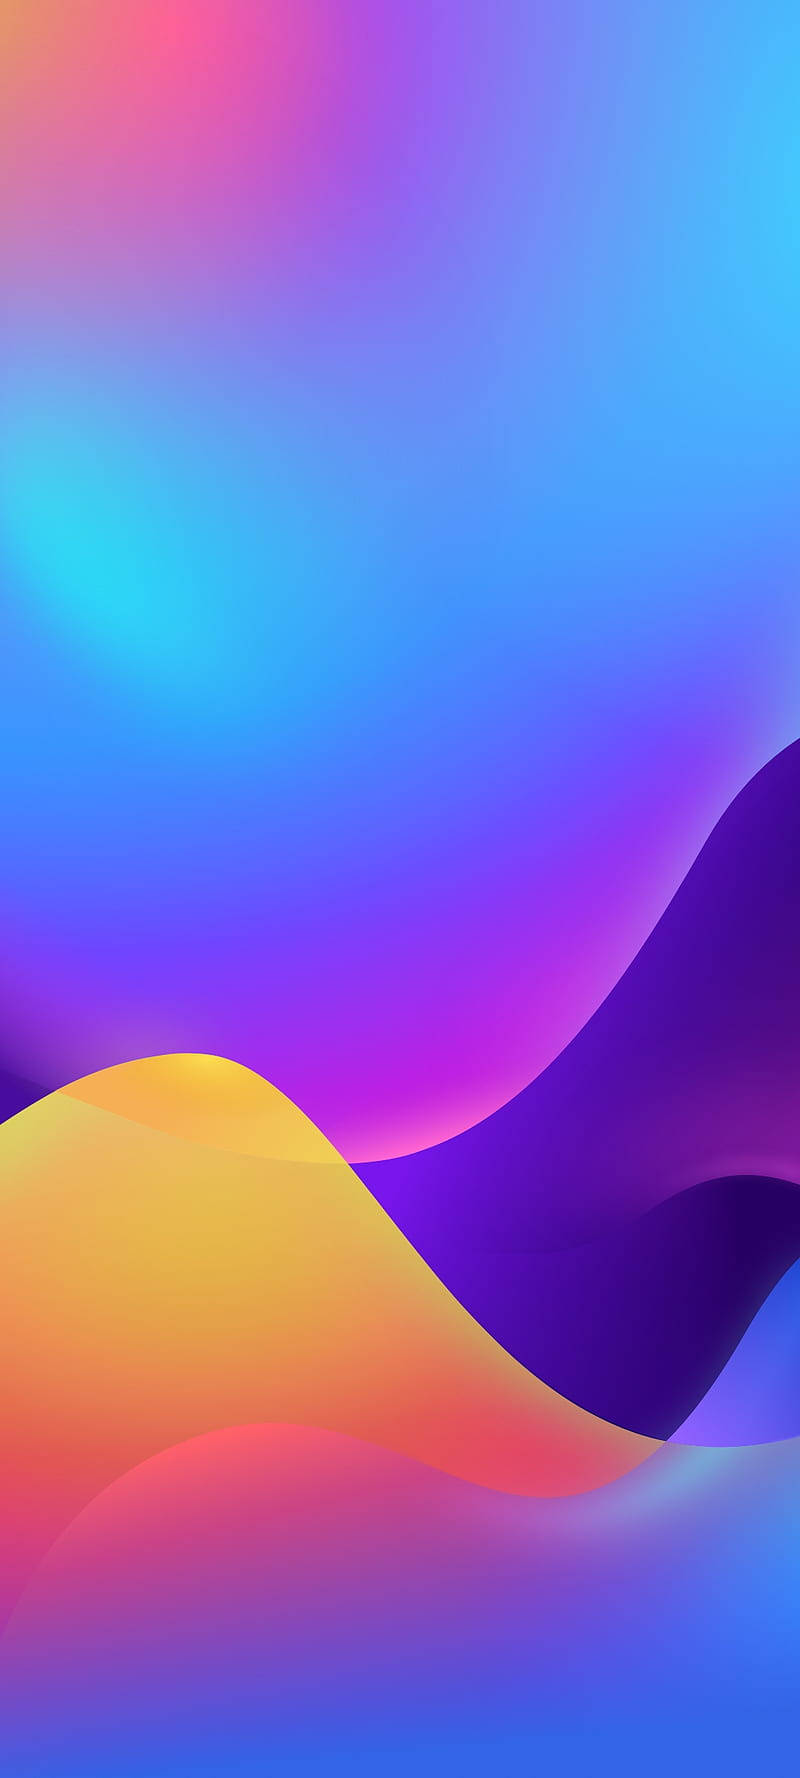 The Sleek And Stylish Realme 7 Pro Android Smartphone Wallpaper